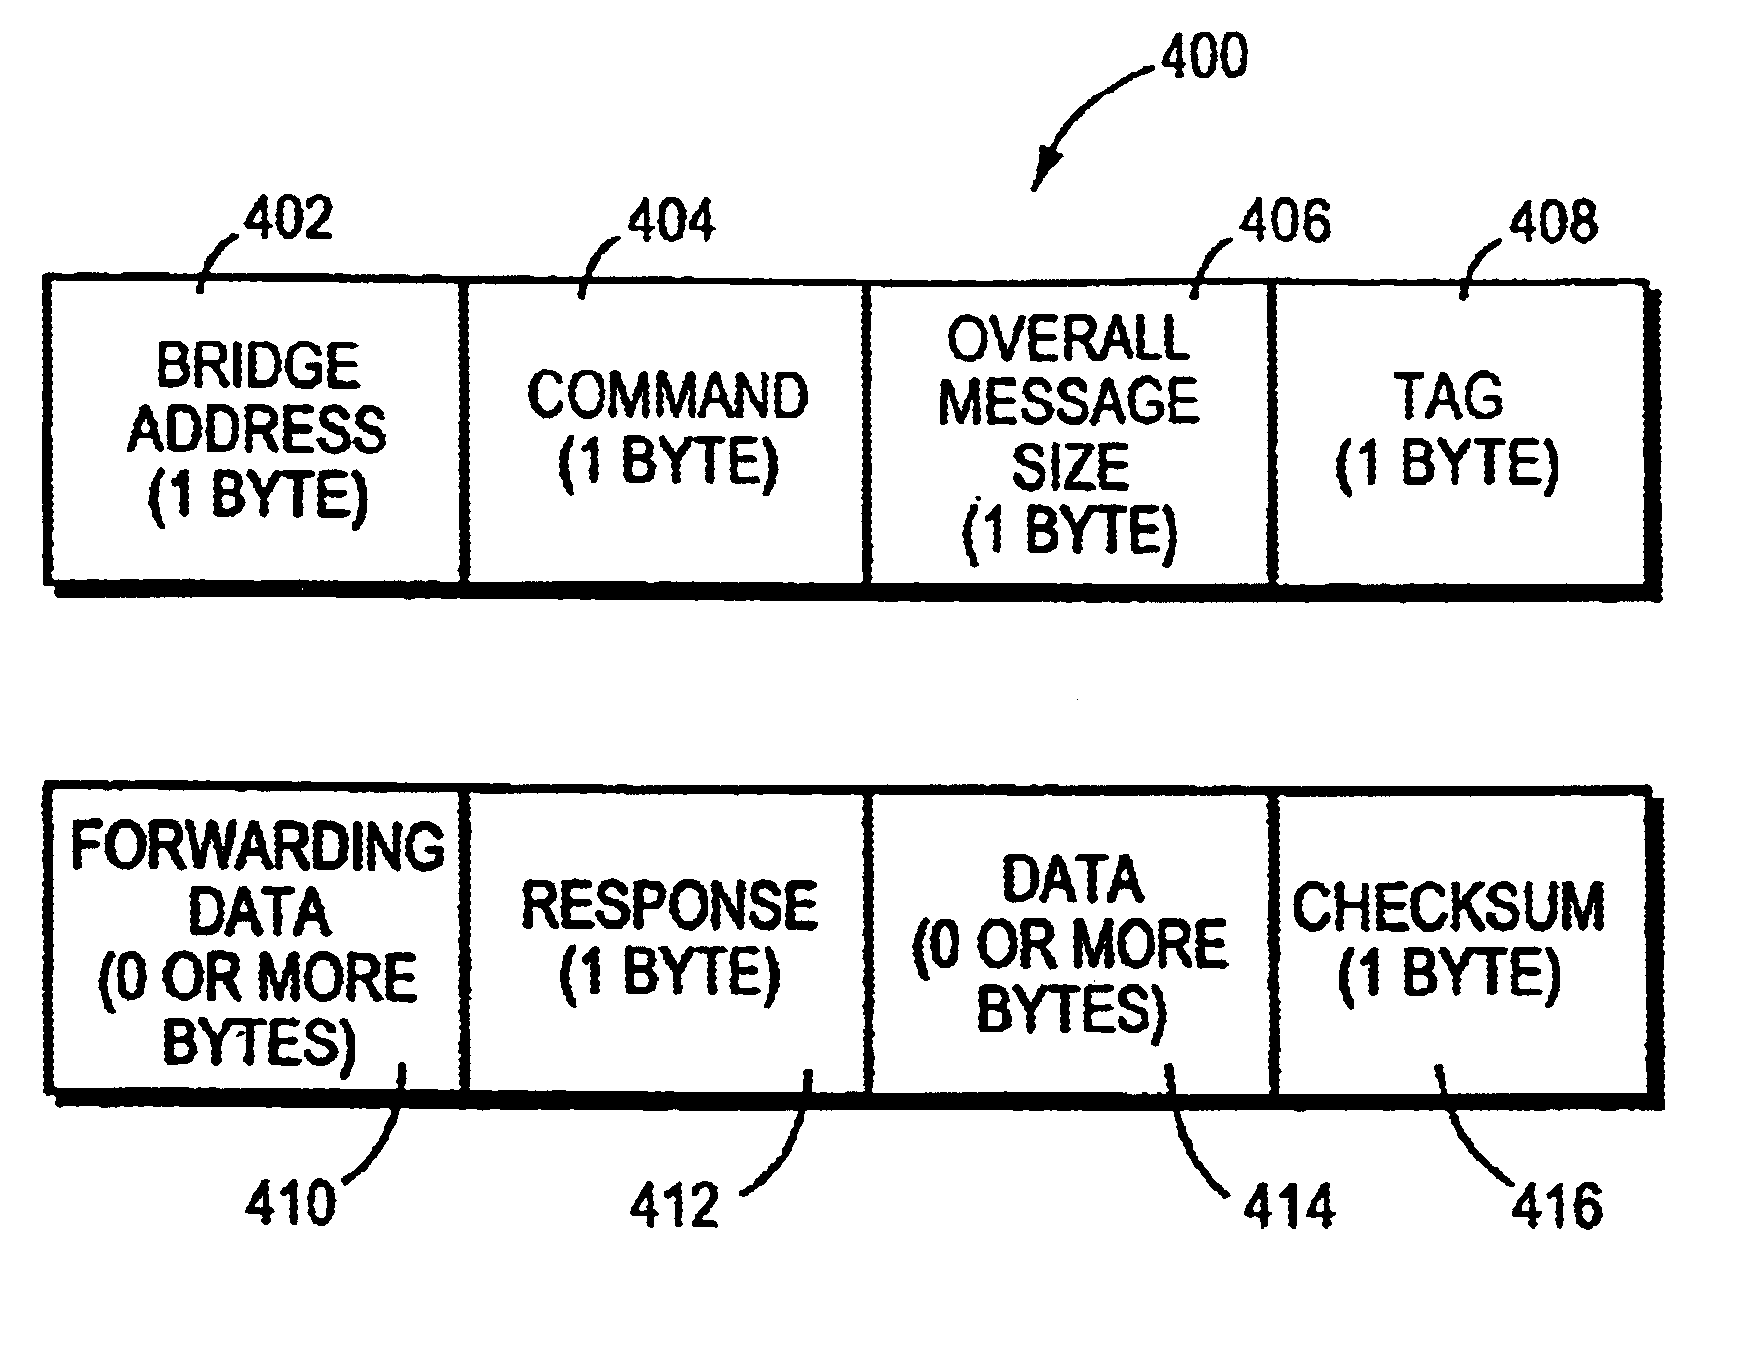 Fault-tolerant maintenance bus protocol and method for using the same